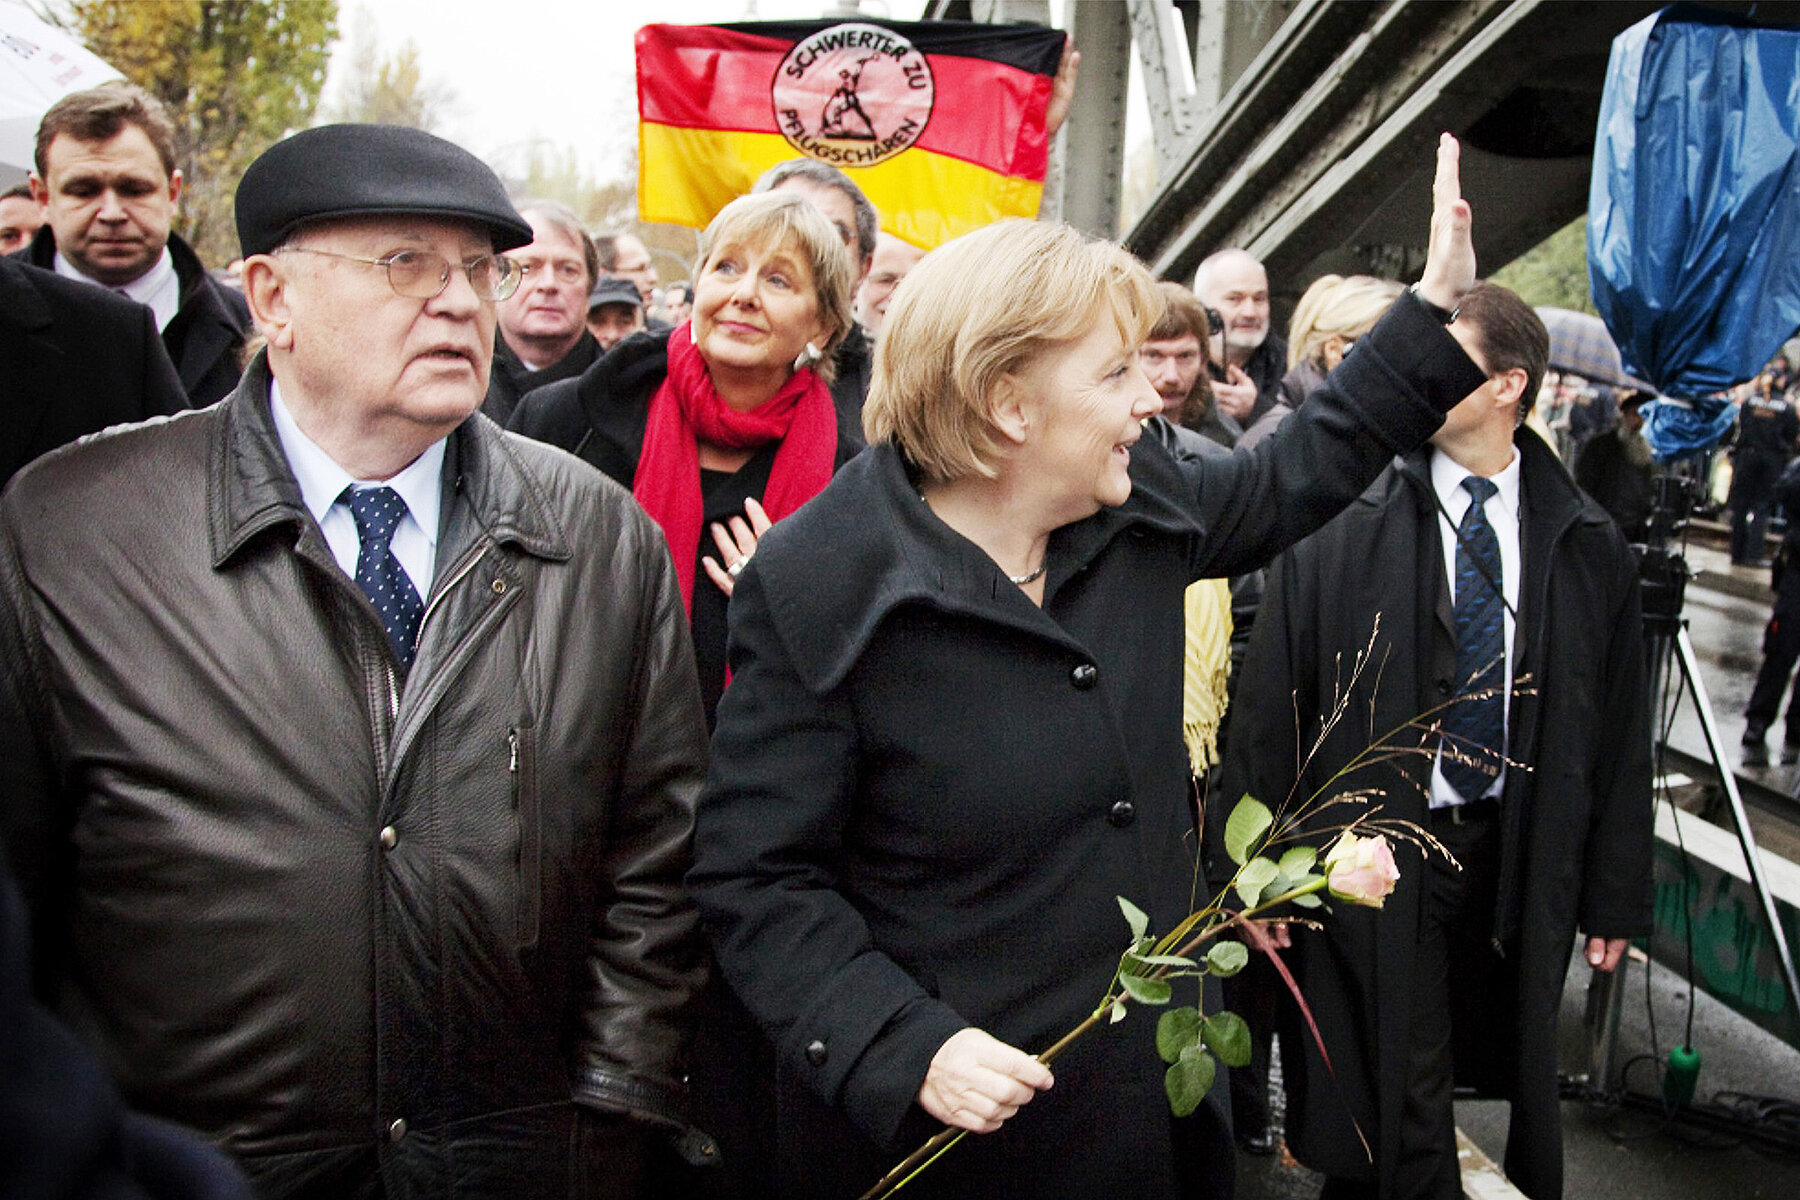 Michael Gorbachev on the left and Angela Merkel on the right at Bernauer Strasse on the Bösebrücke. Merkel holds a rose in her hand. A German flag is waved behind them.